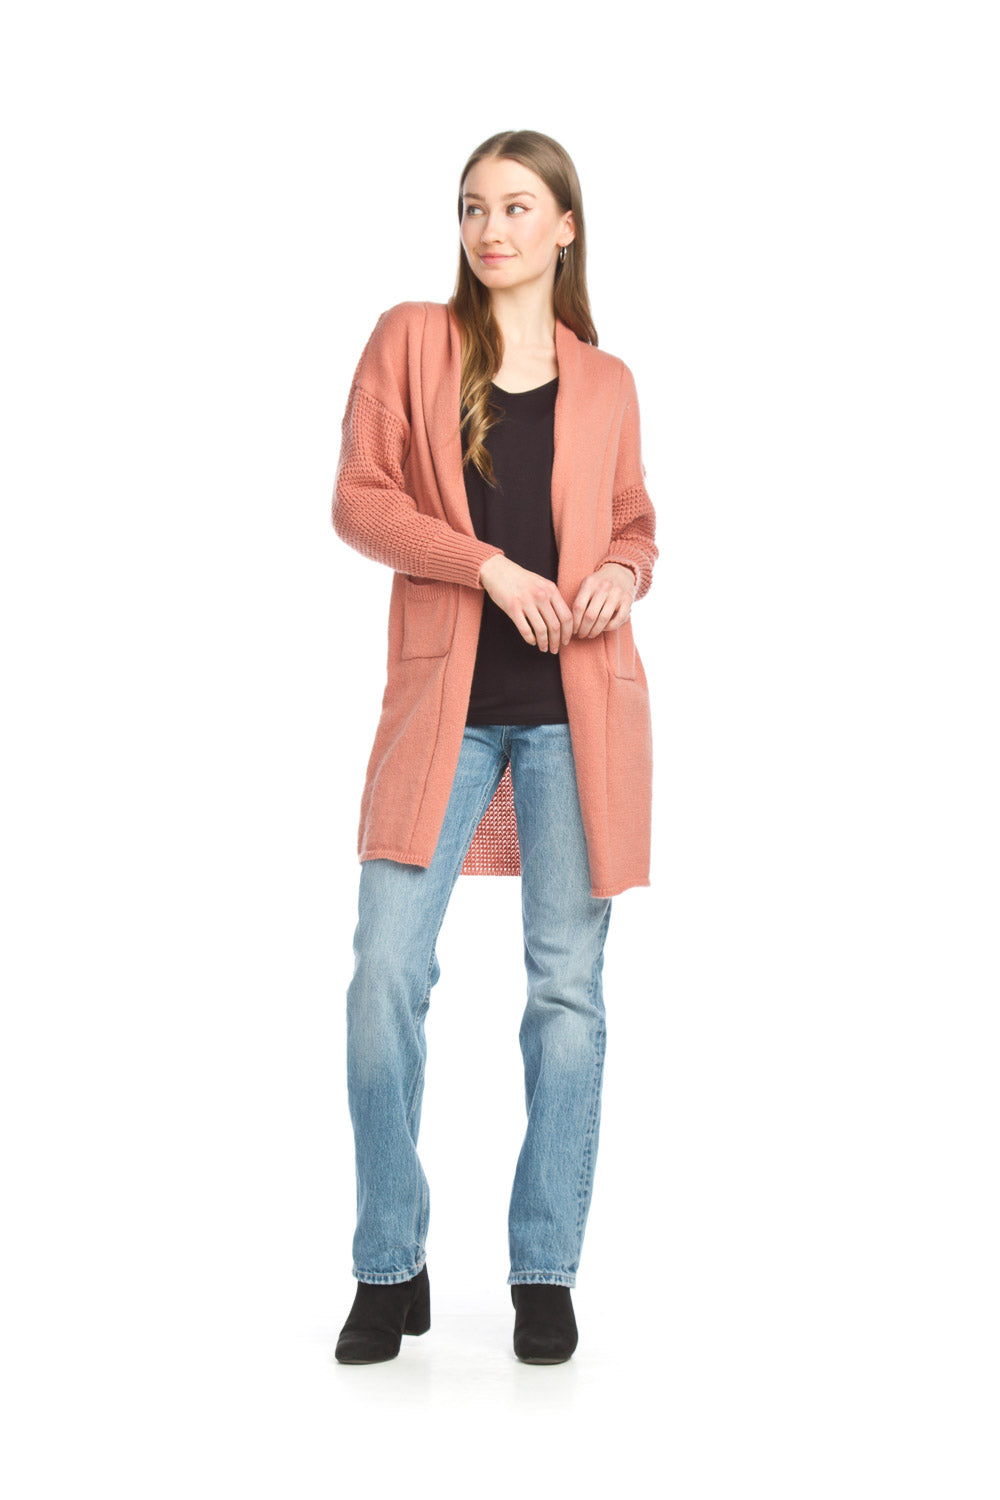 ST-15232 - Soft Knit Cardigan with Pockets